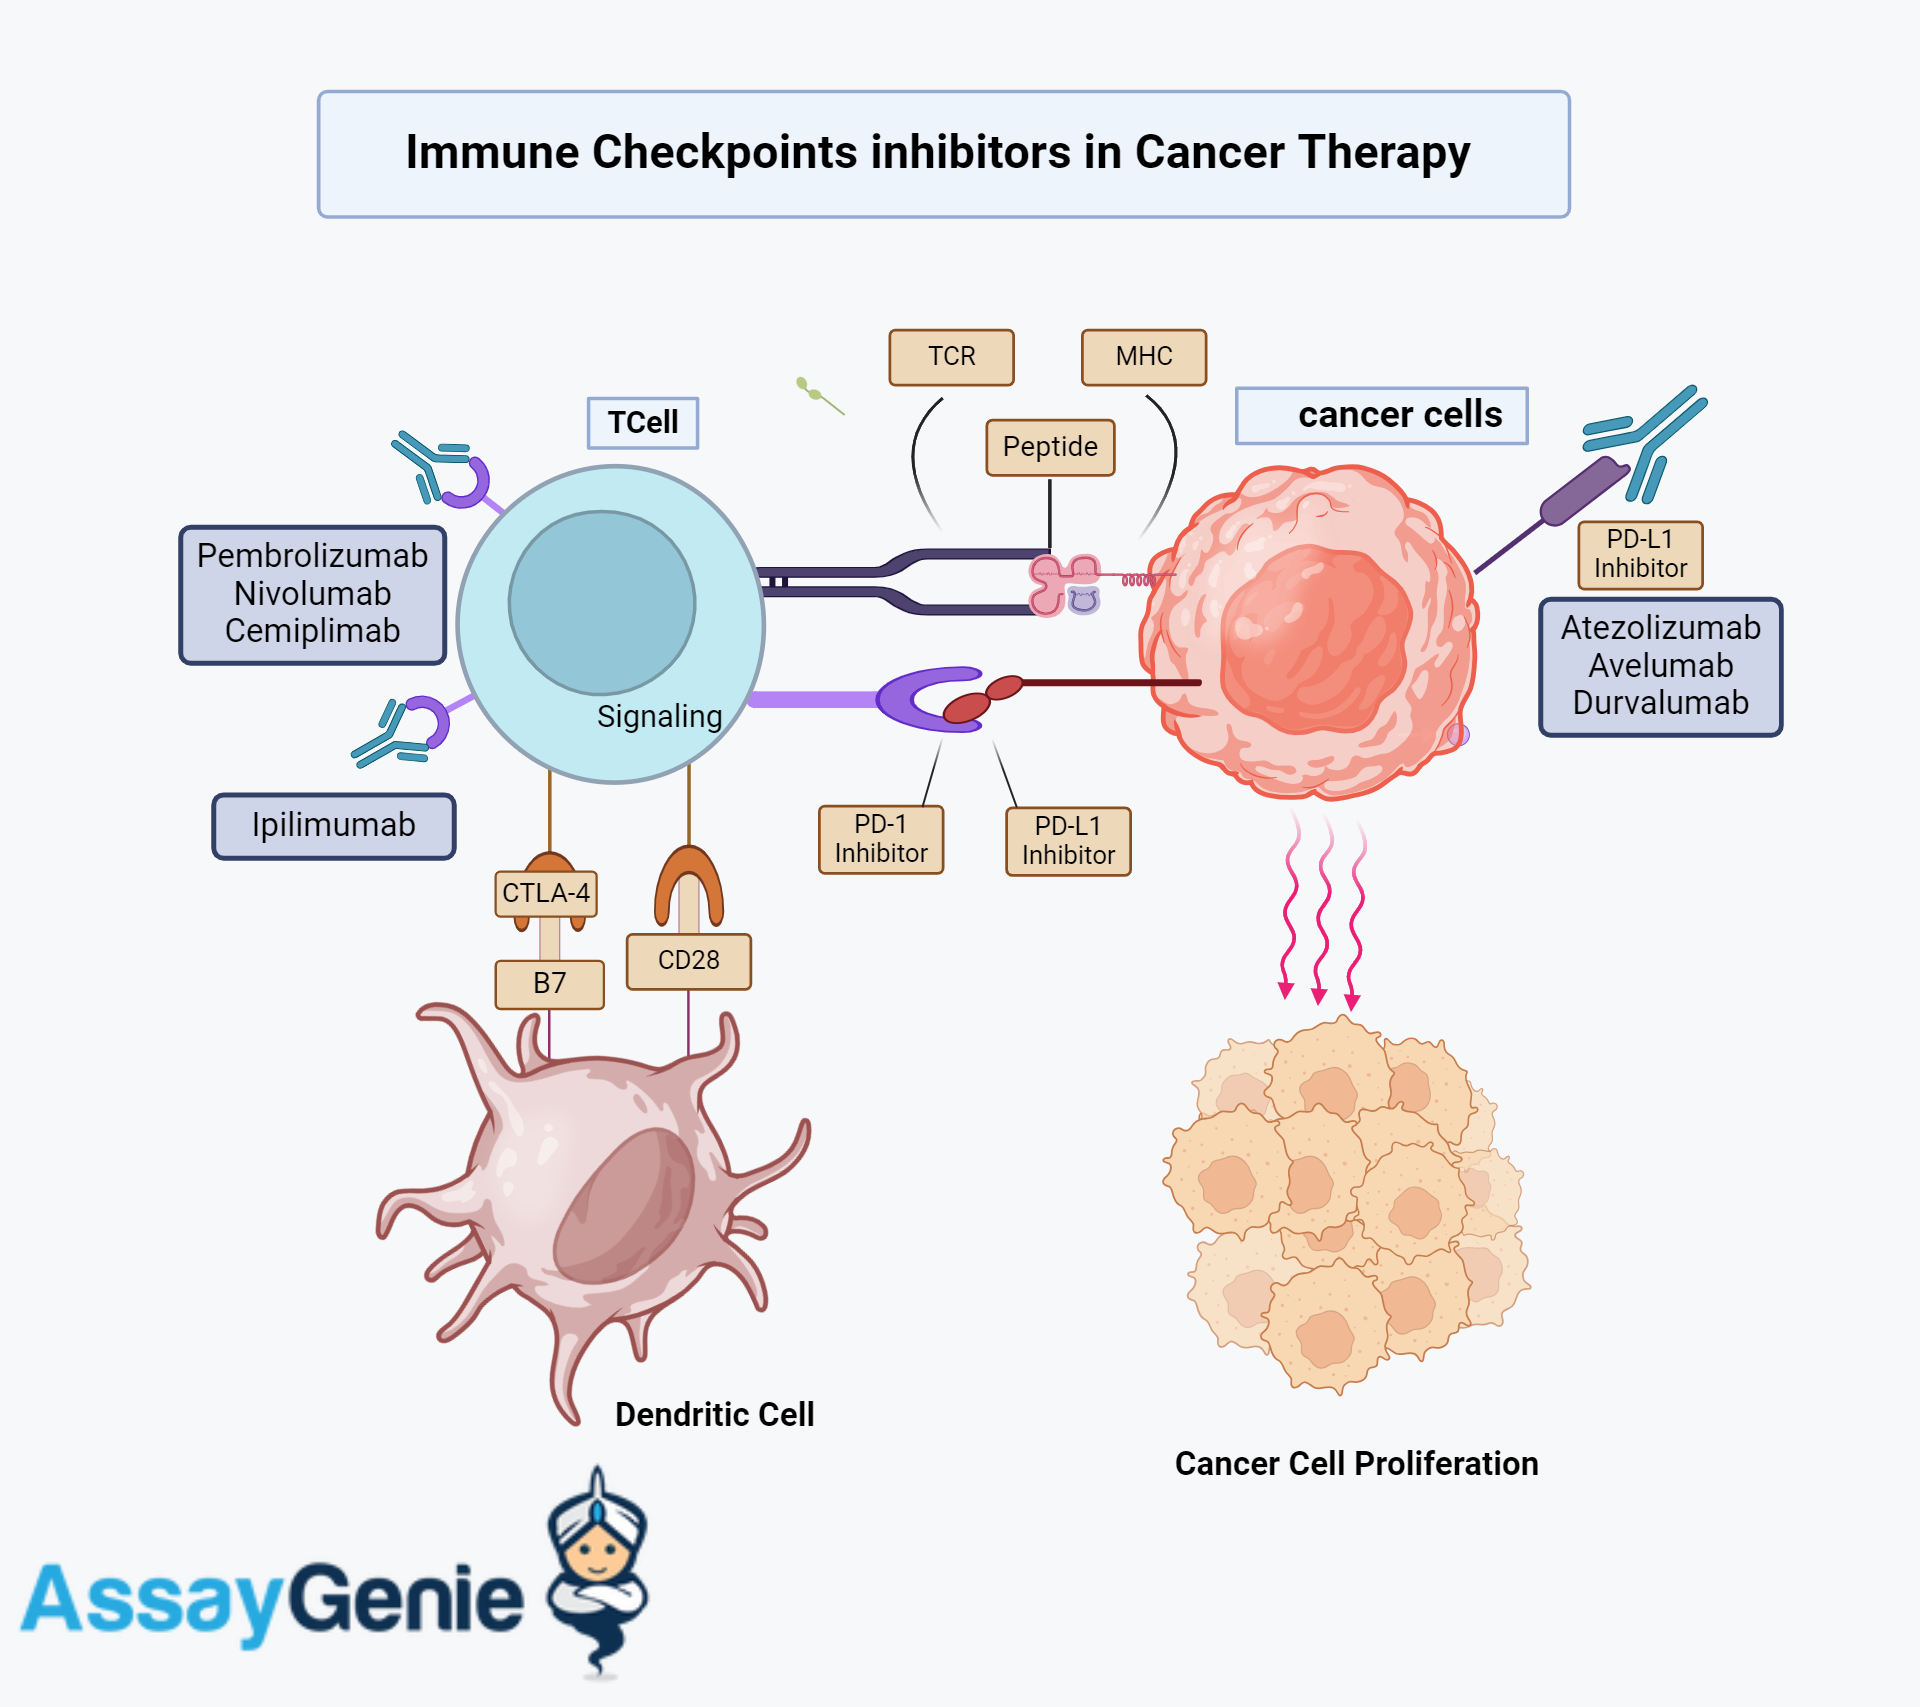 Targeting Immune checkpoints inhibitors in cancer therapy